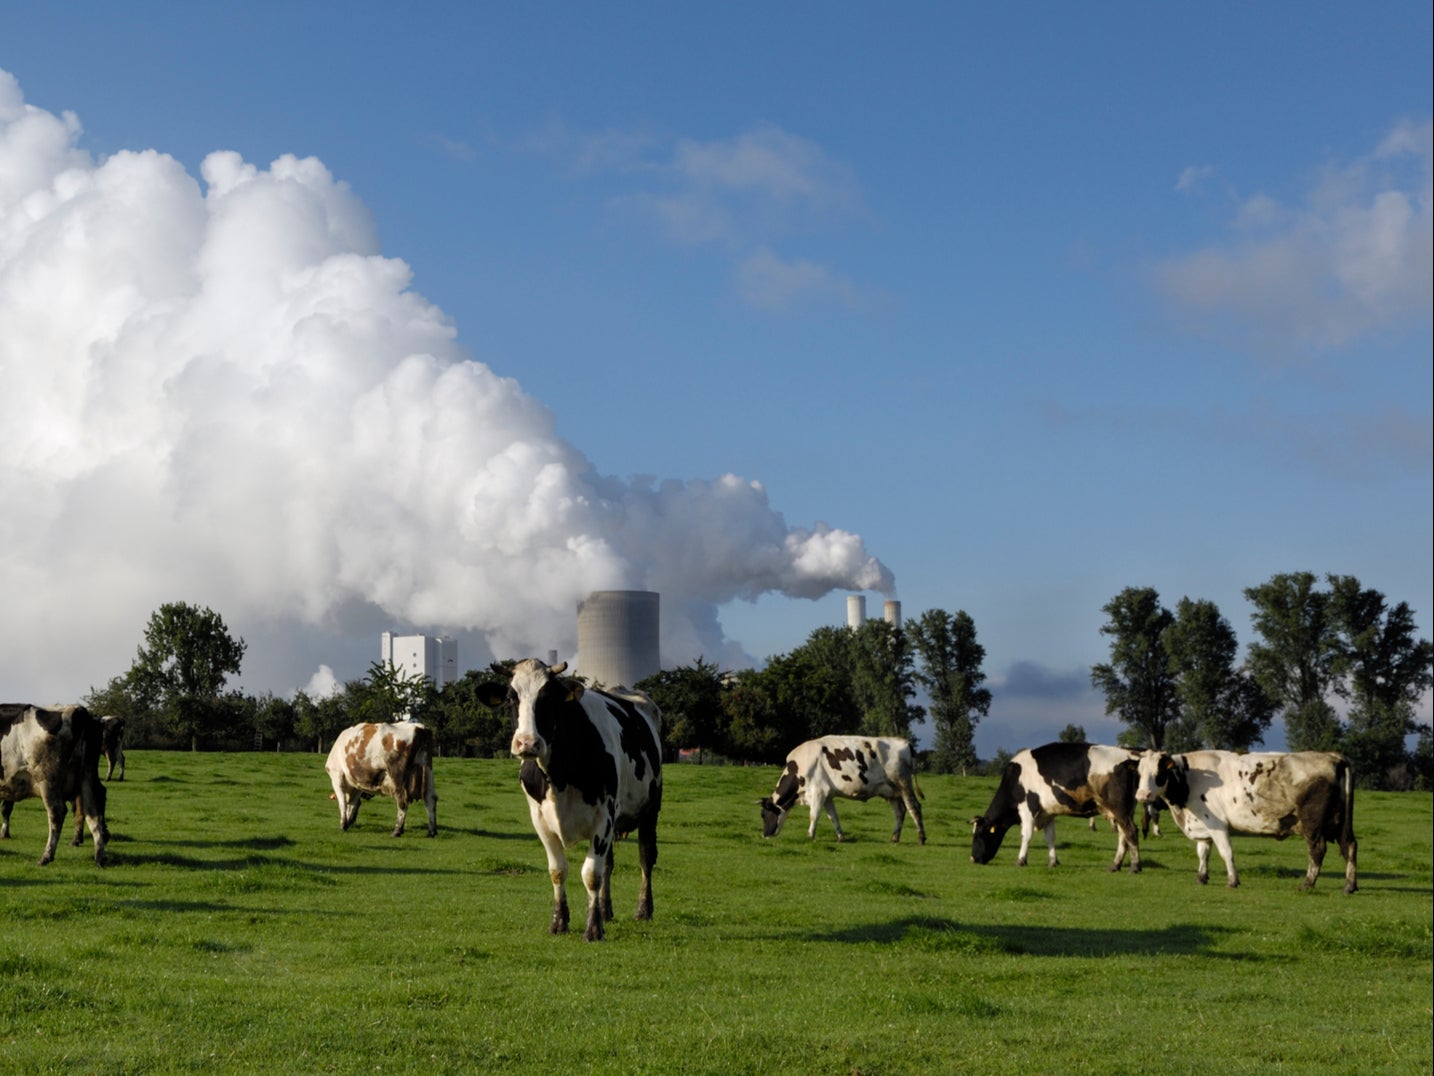 ‘Cows are the new coal’, according to chair of FAIRR investment group Jeremy Coller